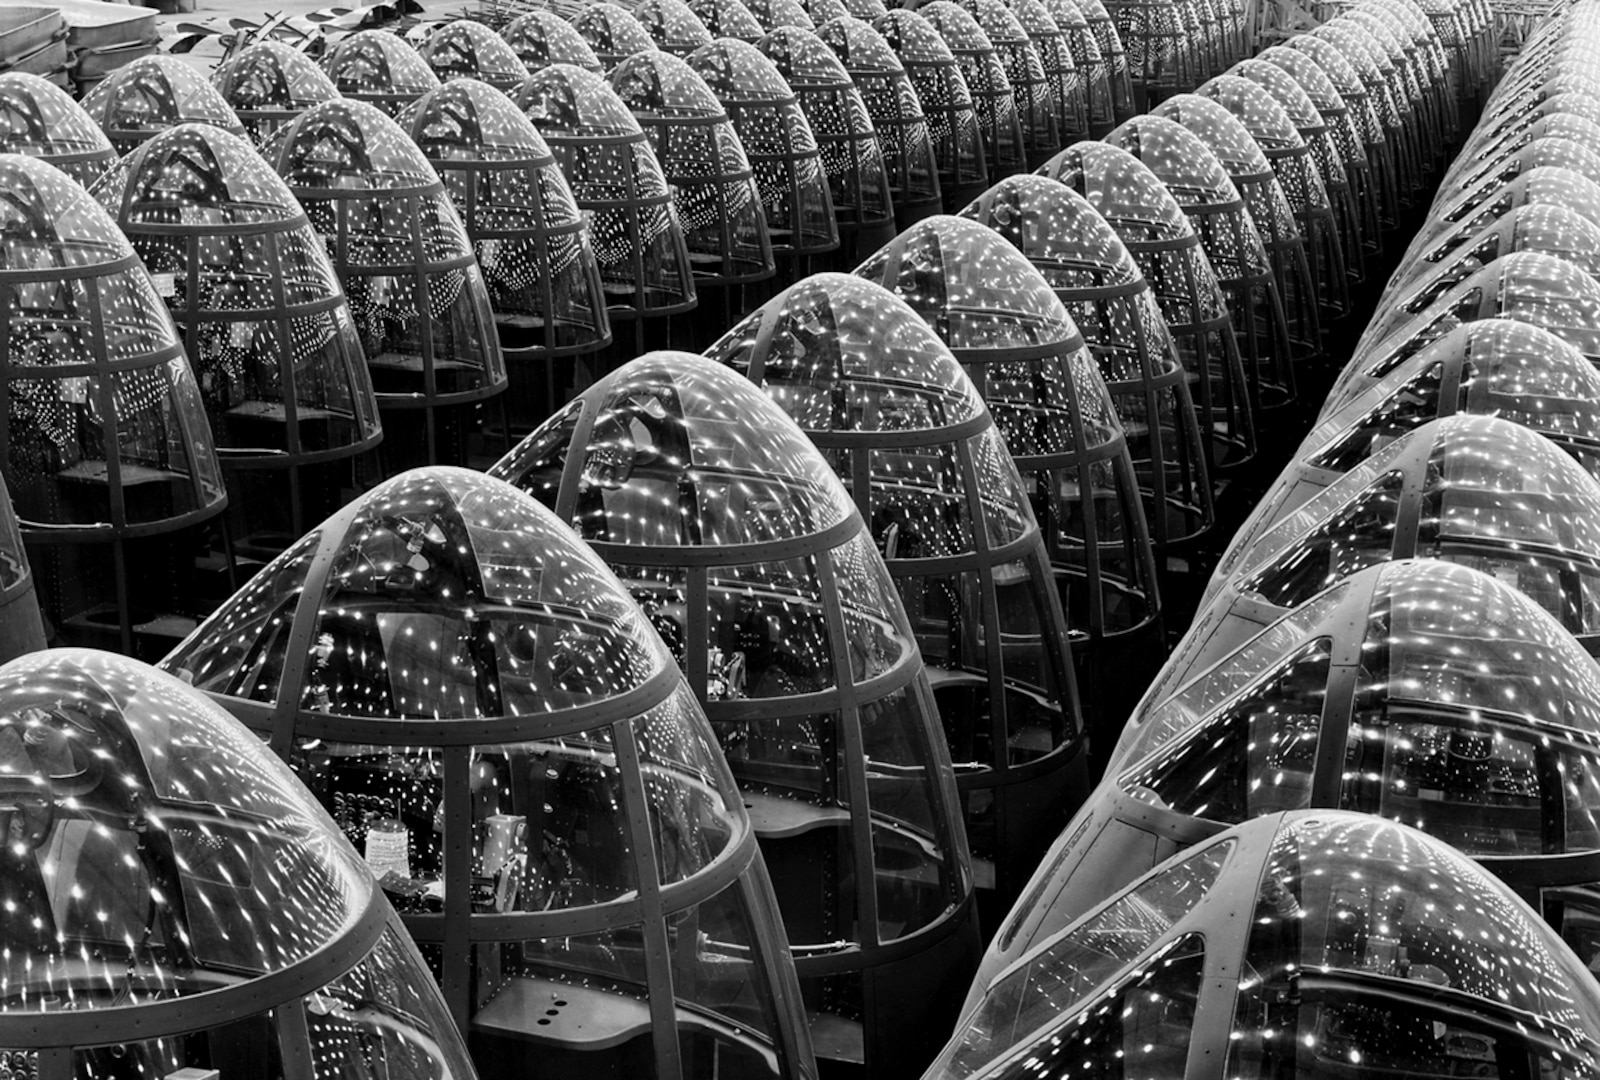 Myriads of lights at the Long Beach, Calif., plant of Douglas Aircraft Company form pleasing star patterns in the shatterproof plexiglass windows of noses for A-20 attack bombers.